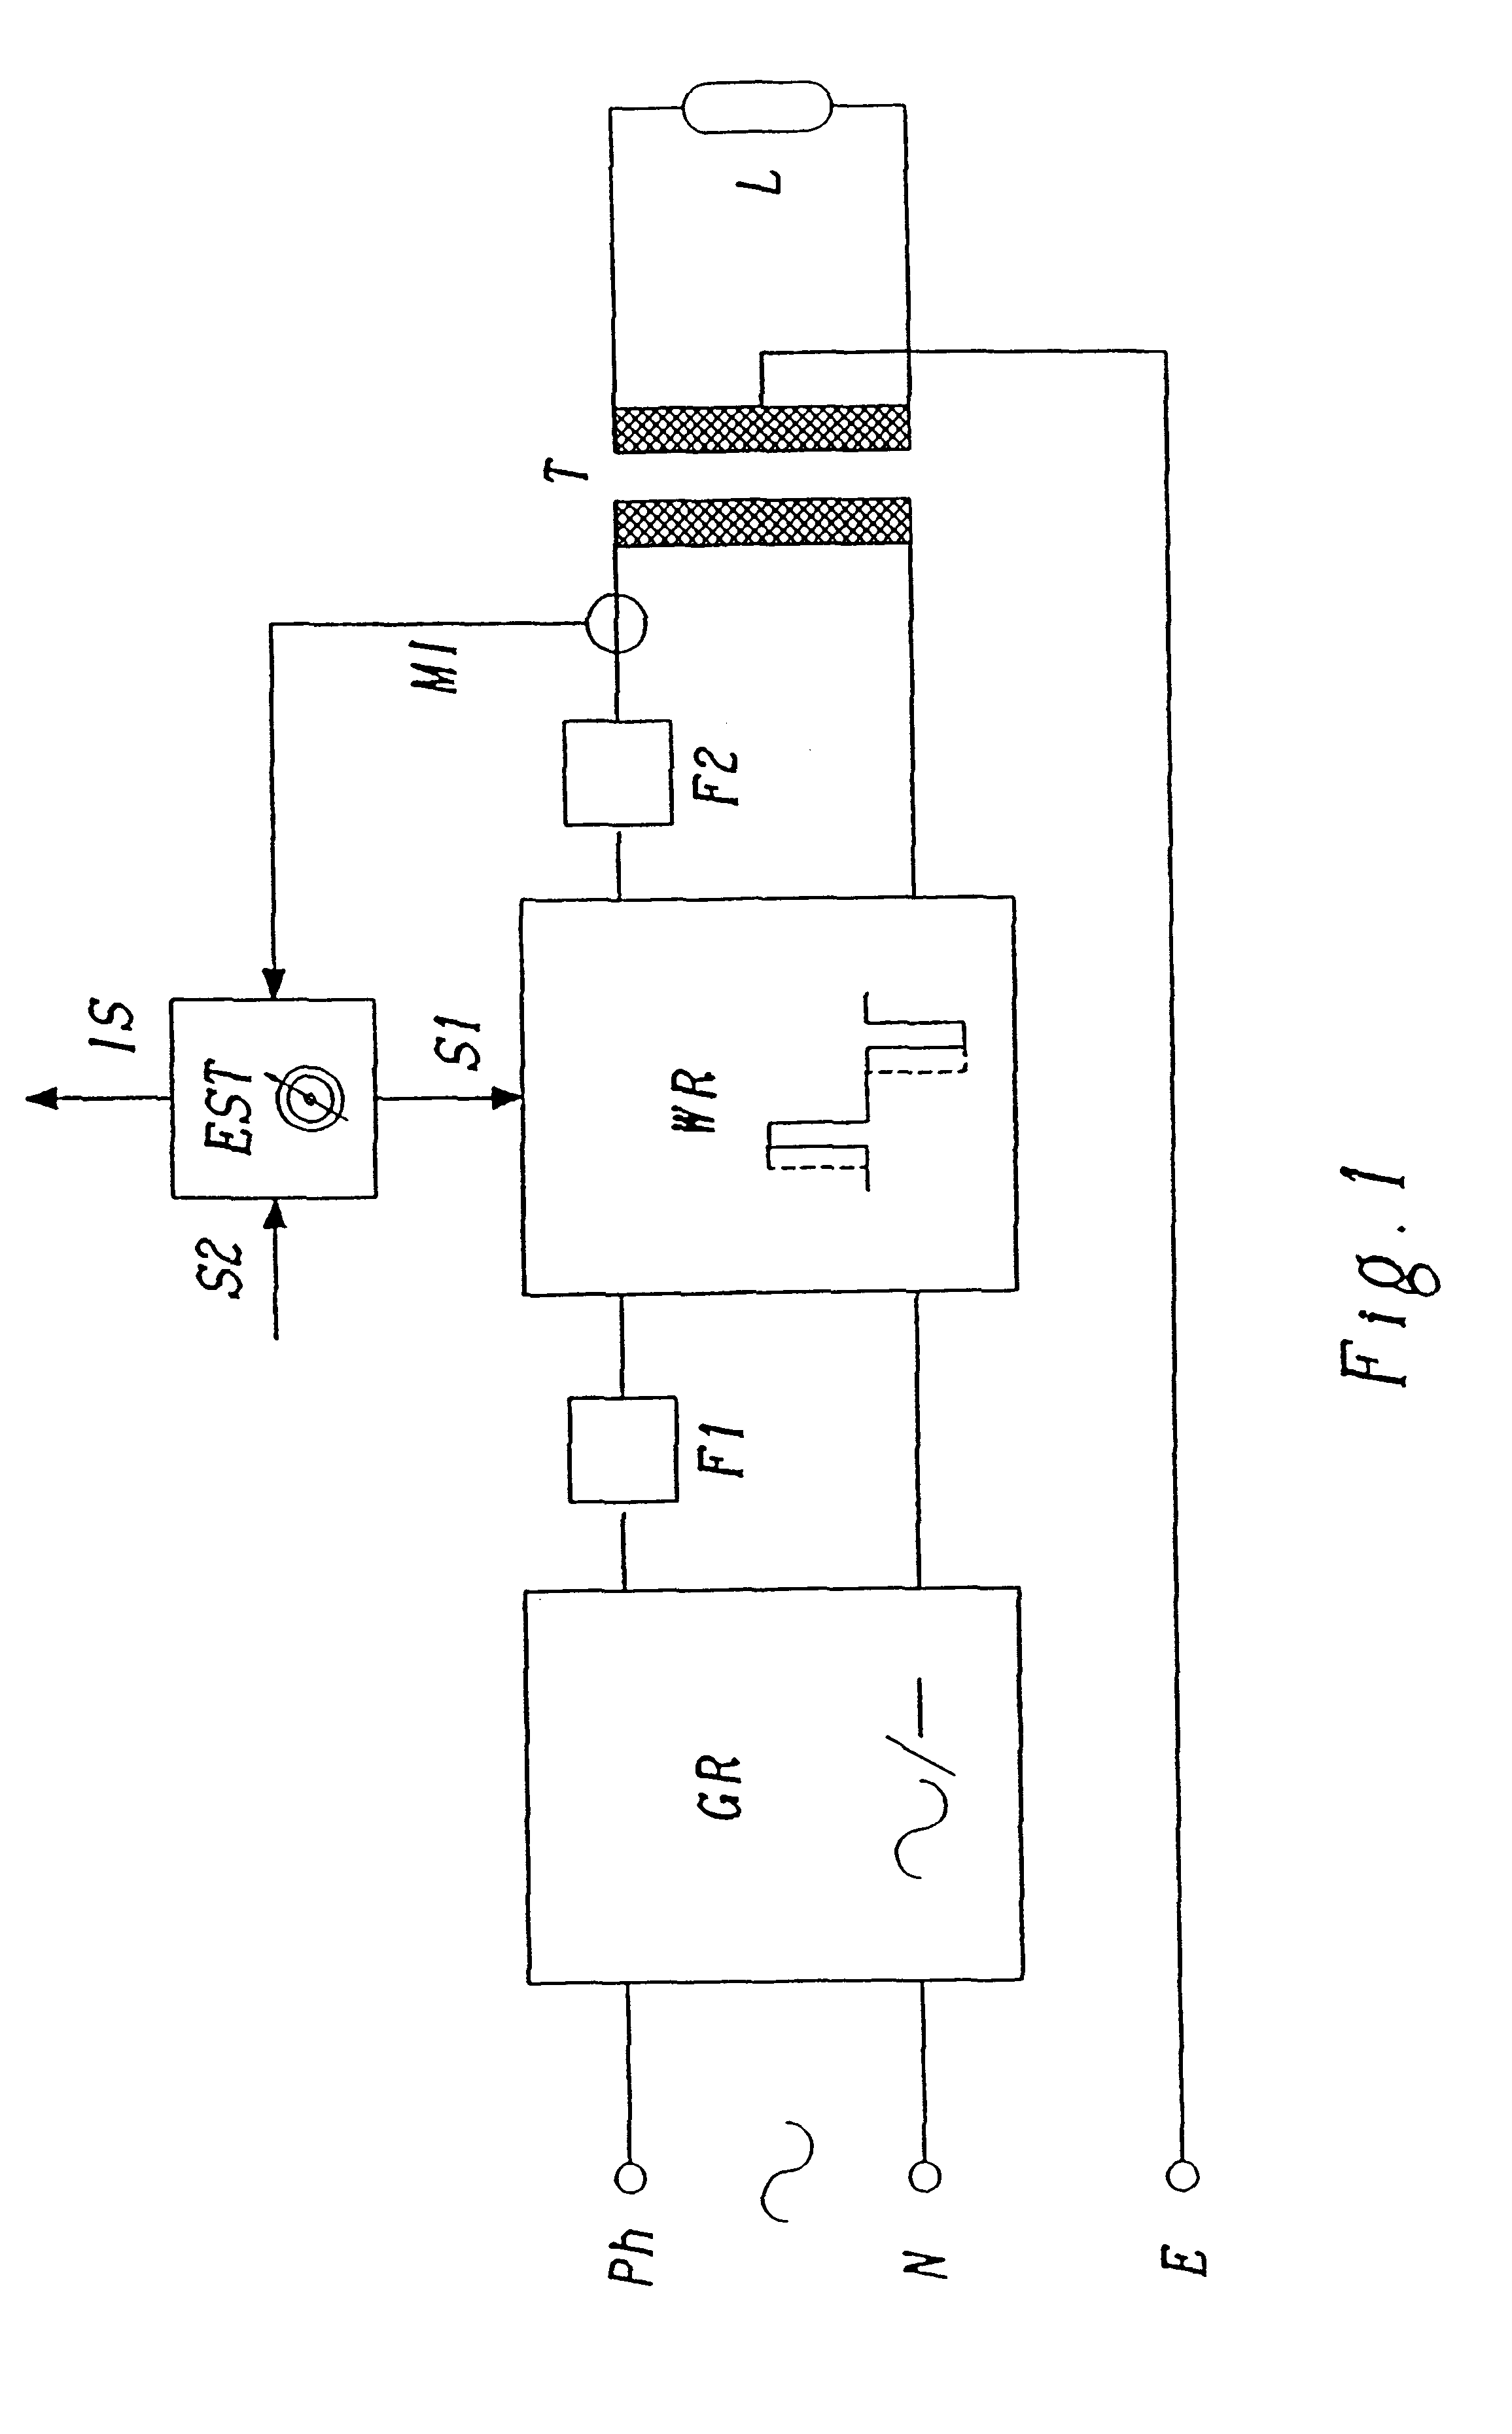 Supply circuit for a fluorescent tube installation